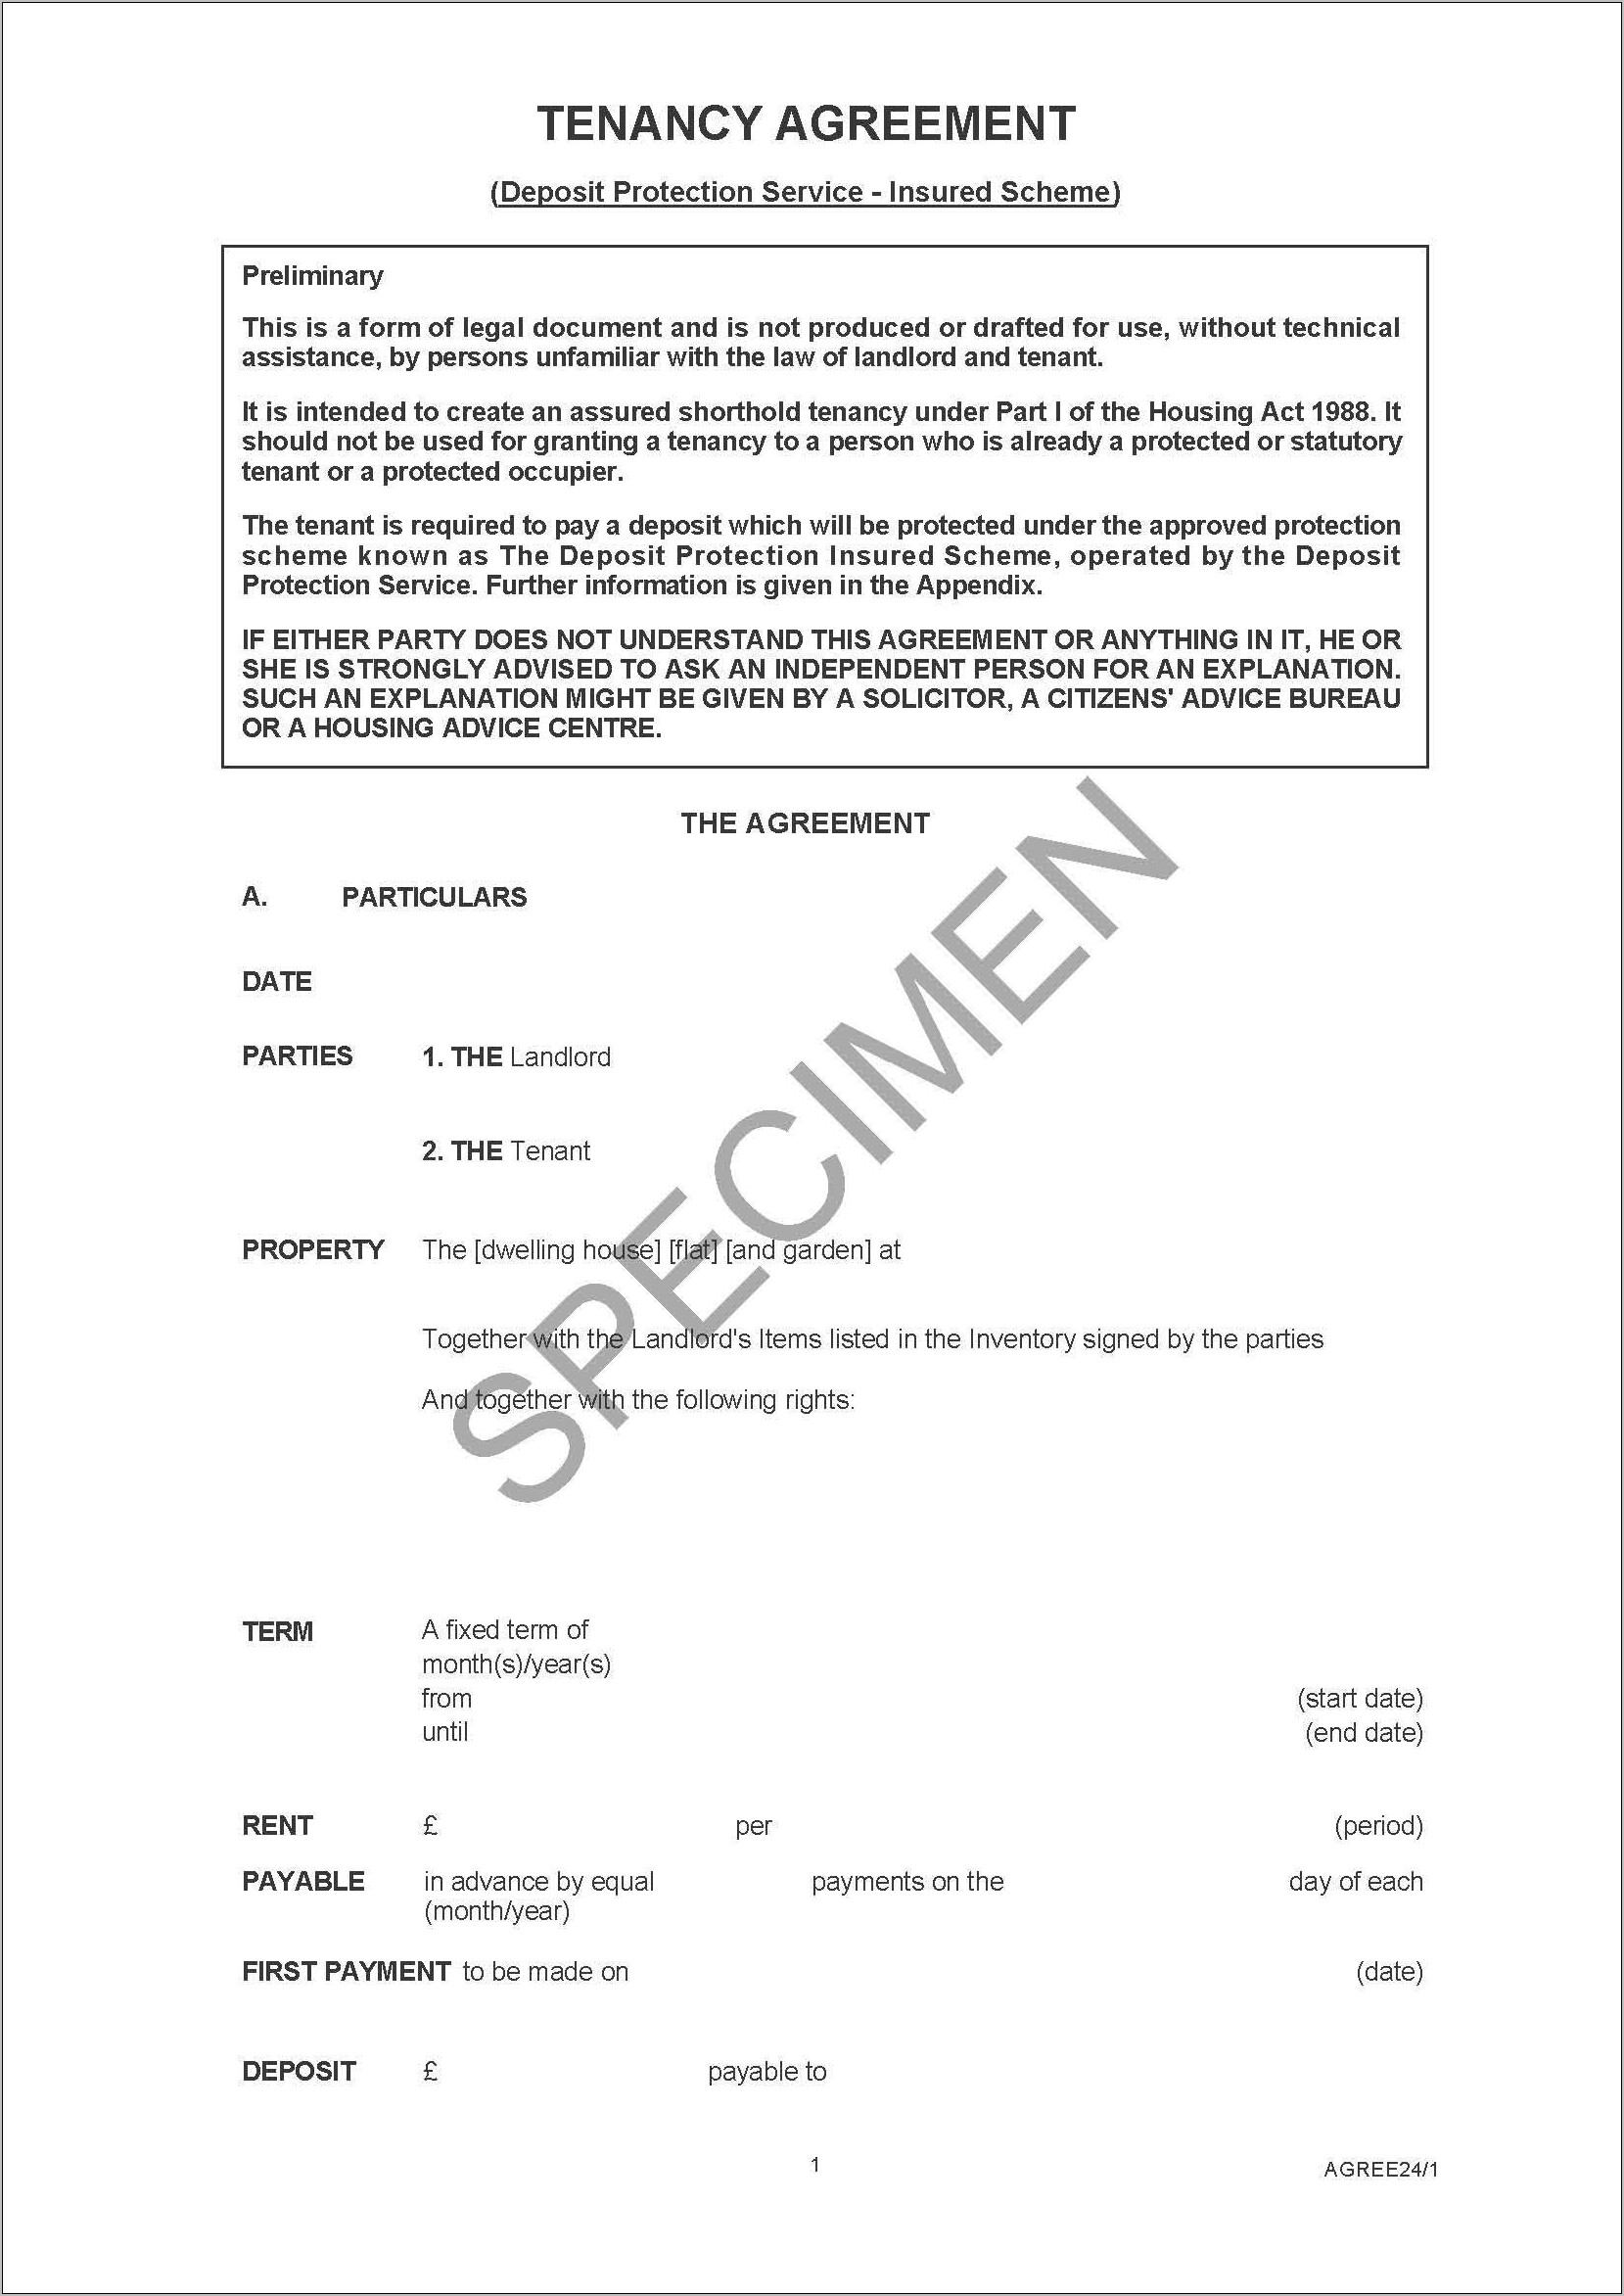 Tenant 30 Day Notice To Vacate Template Templates : Restiumani Resume